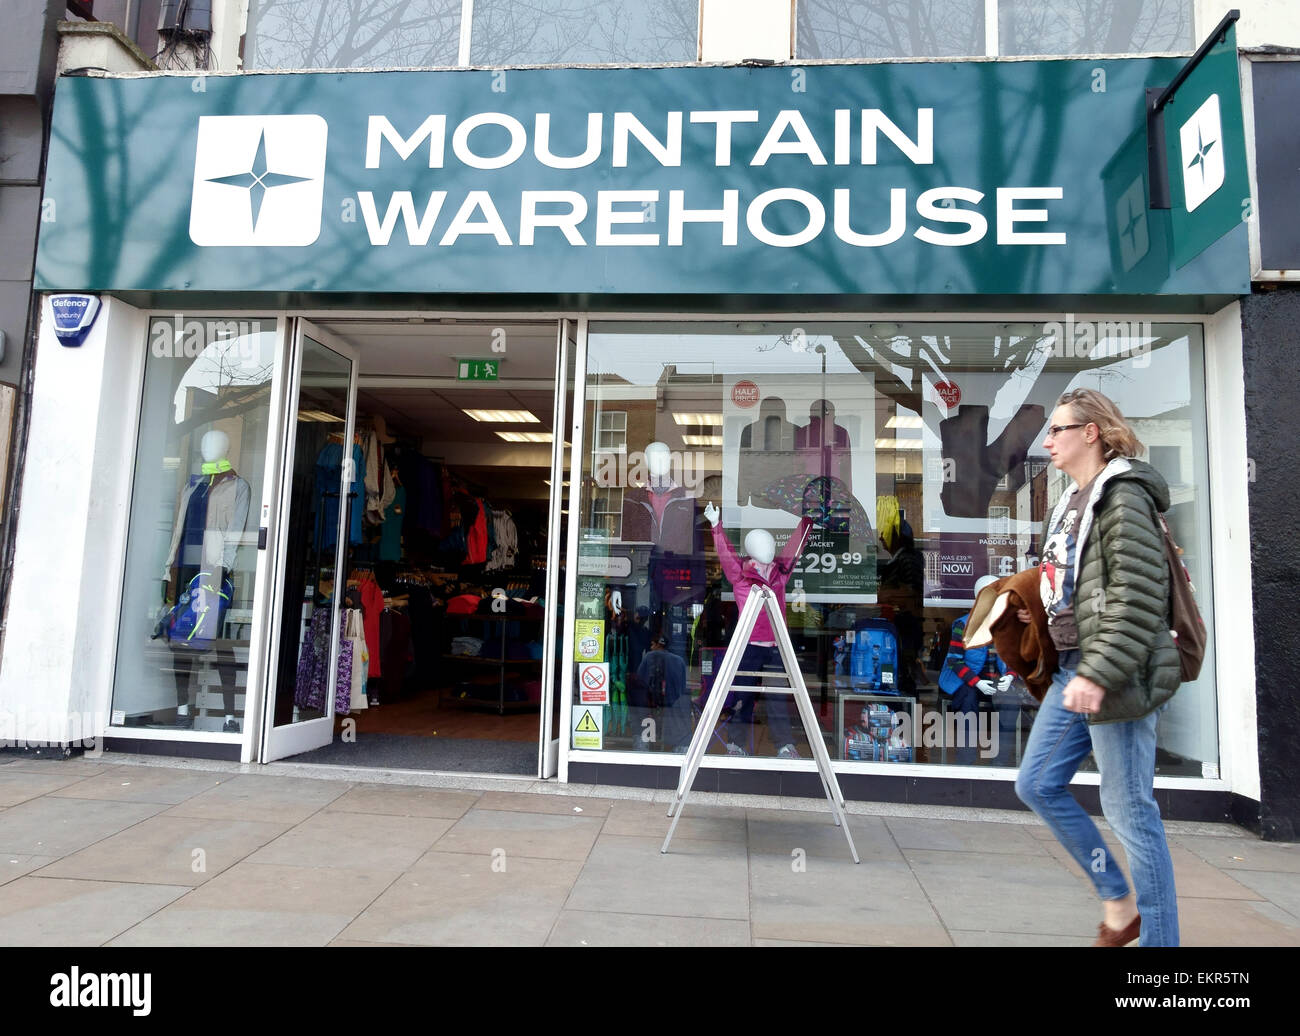 Branch of Mountain Warehouse outdoor clothing and equipment stores, London Stock Photo